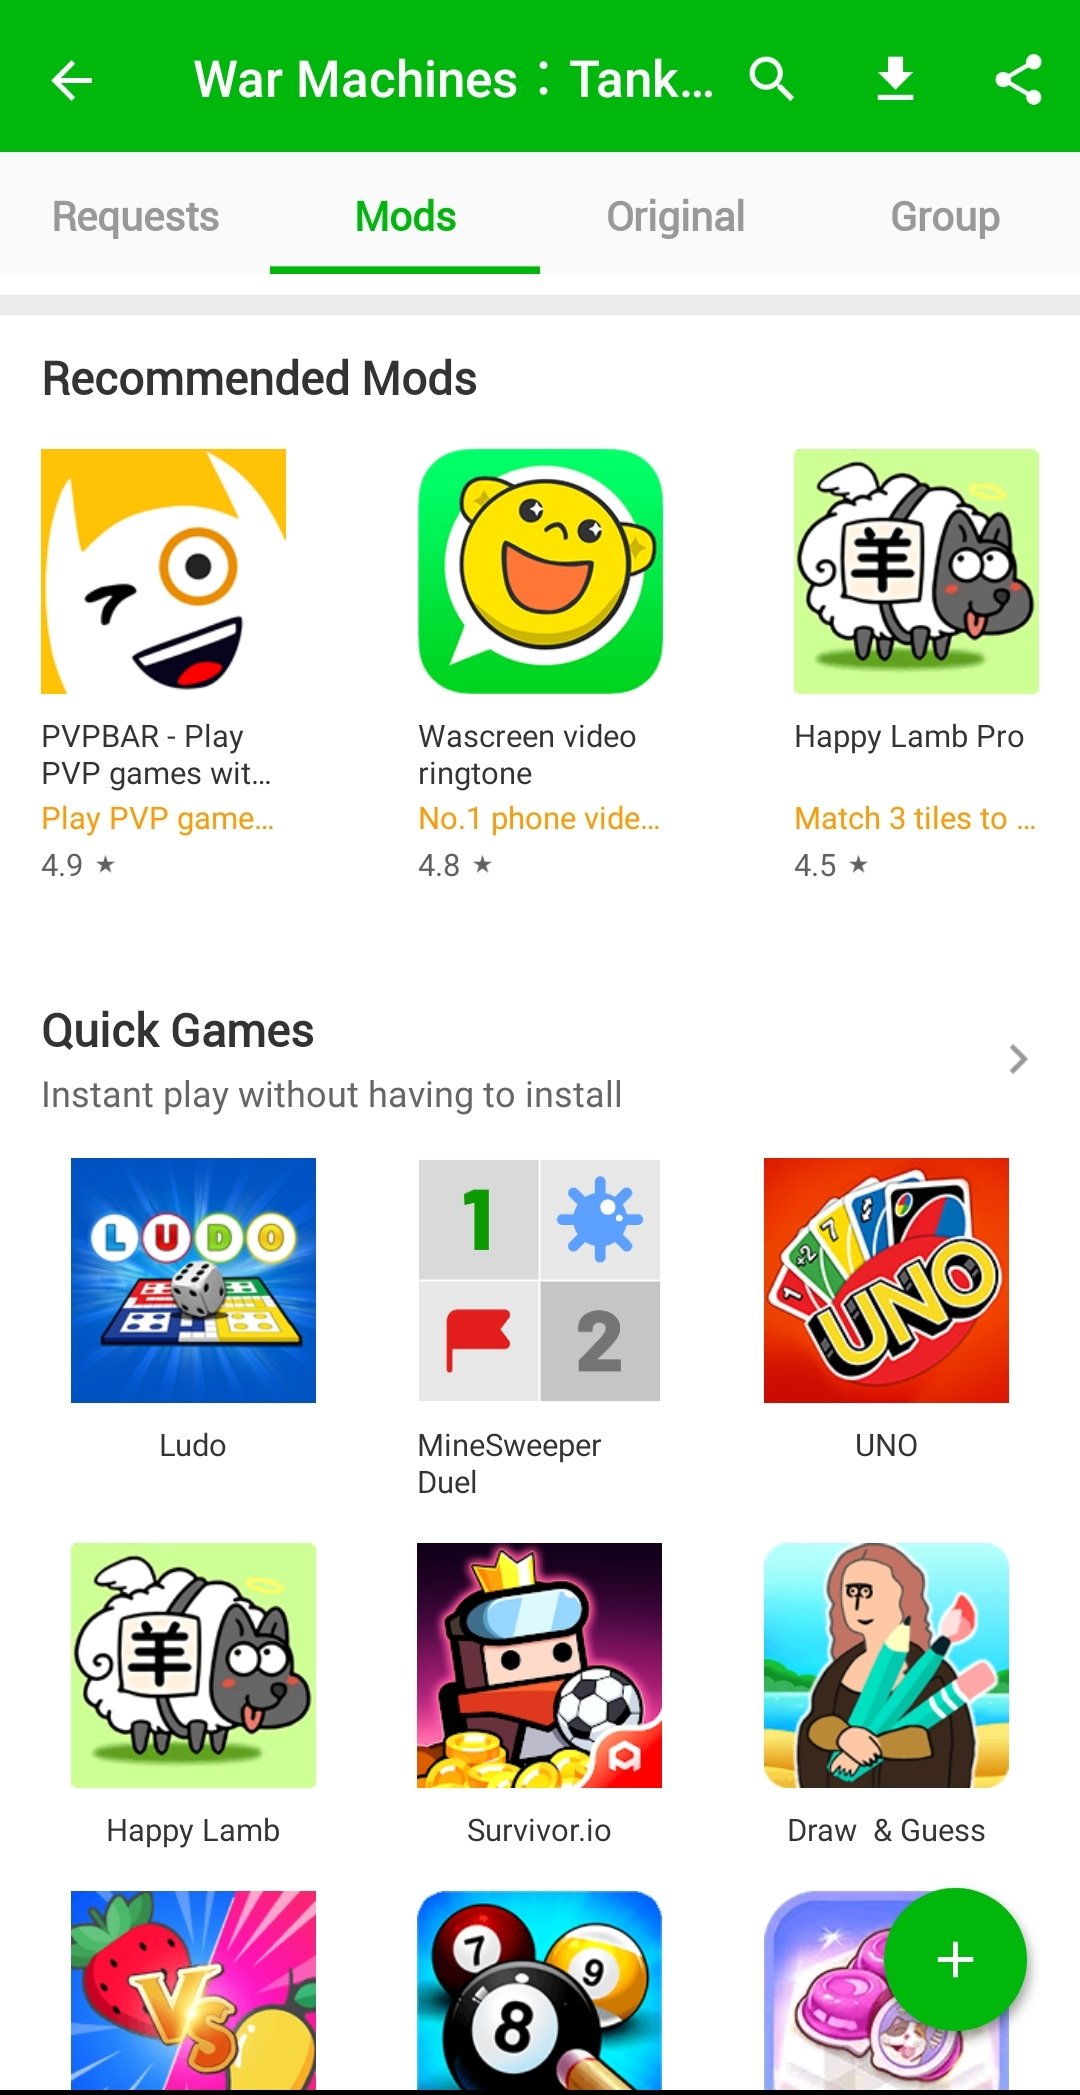 Happymod 2 5 8 Download For Android Apk Free